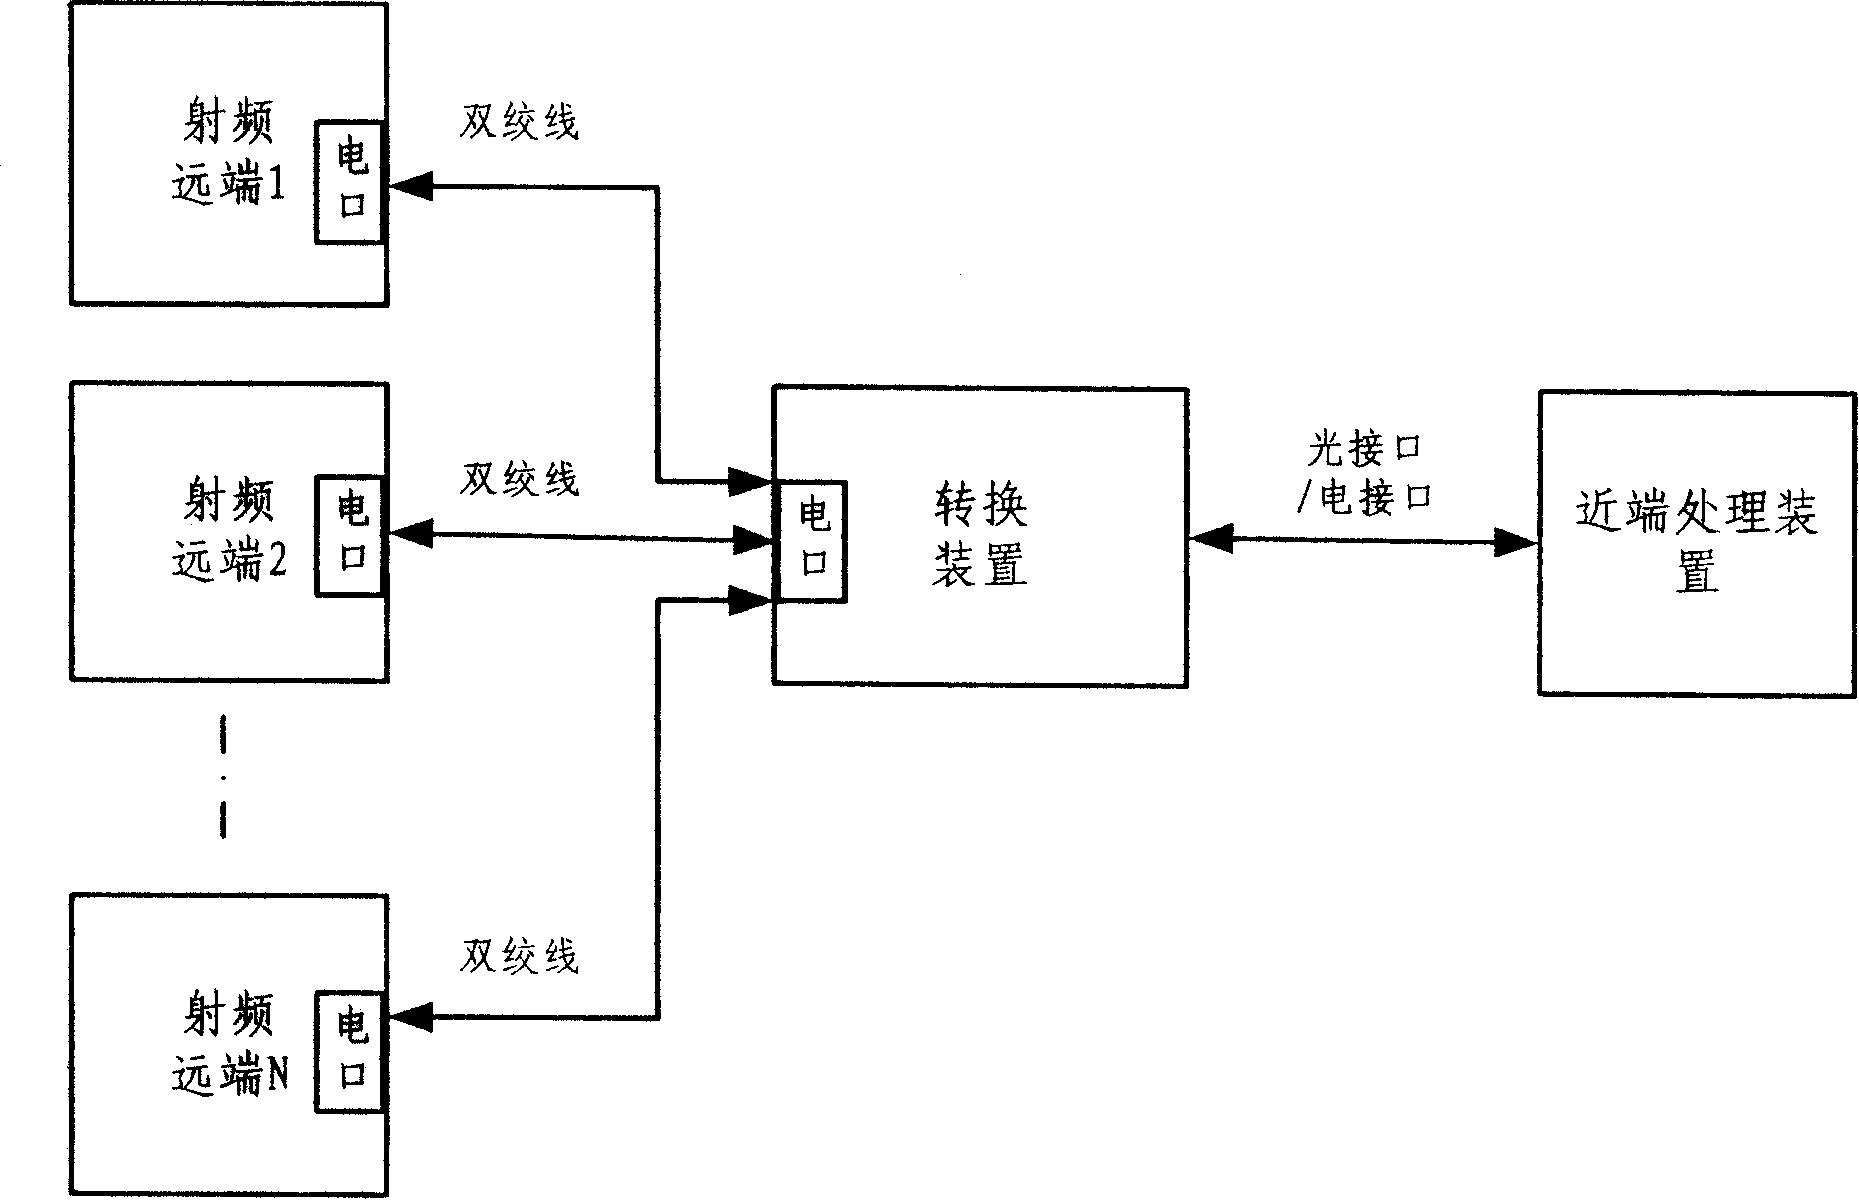 Radio-frequency far end distributed system in radio communication system